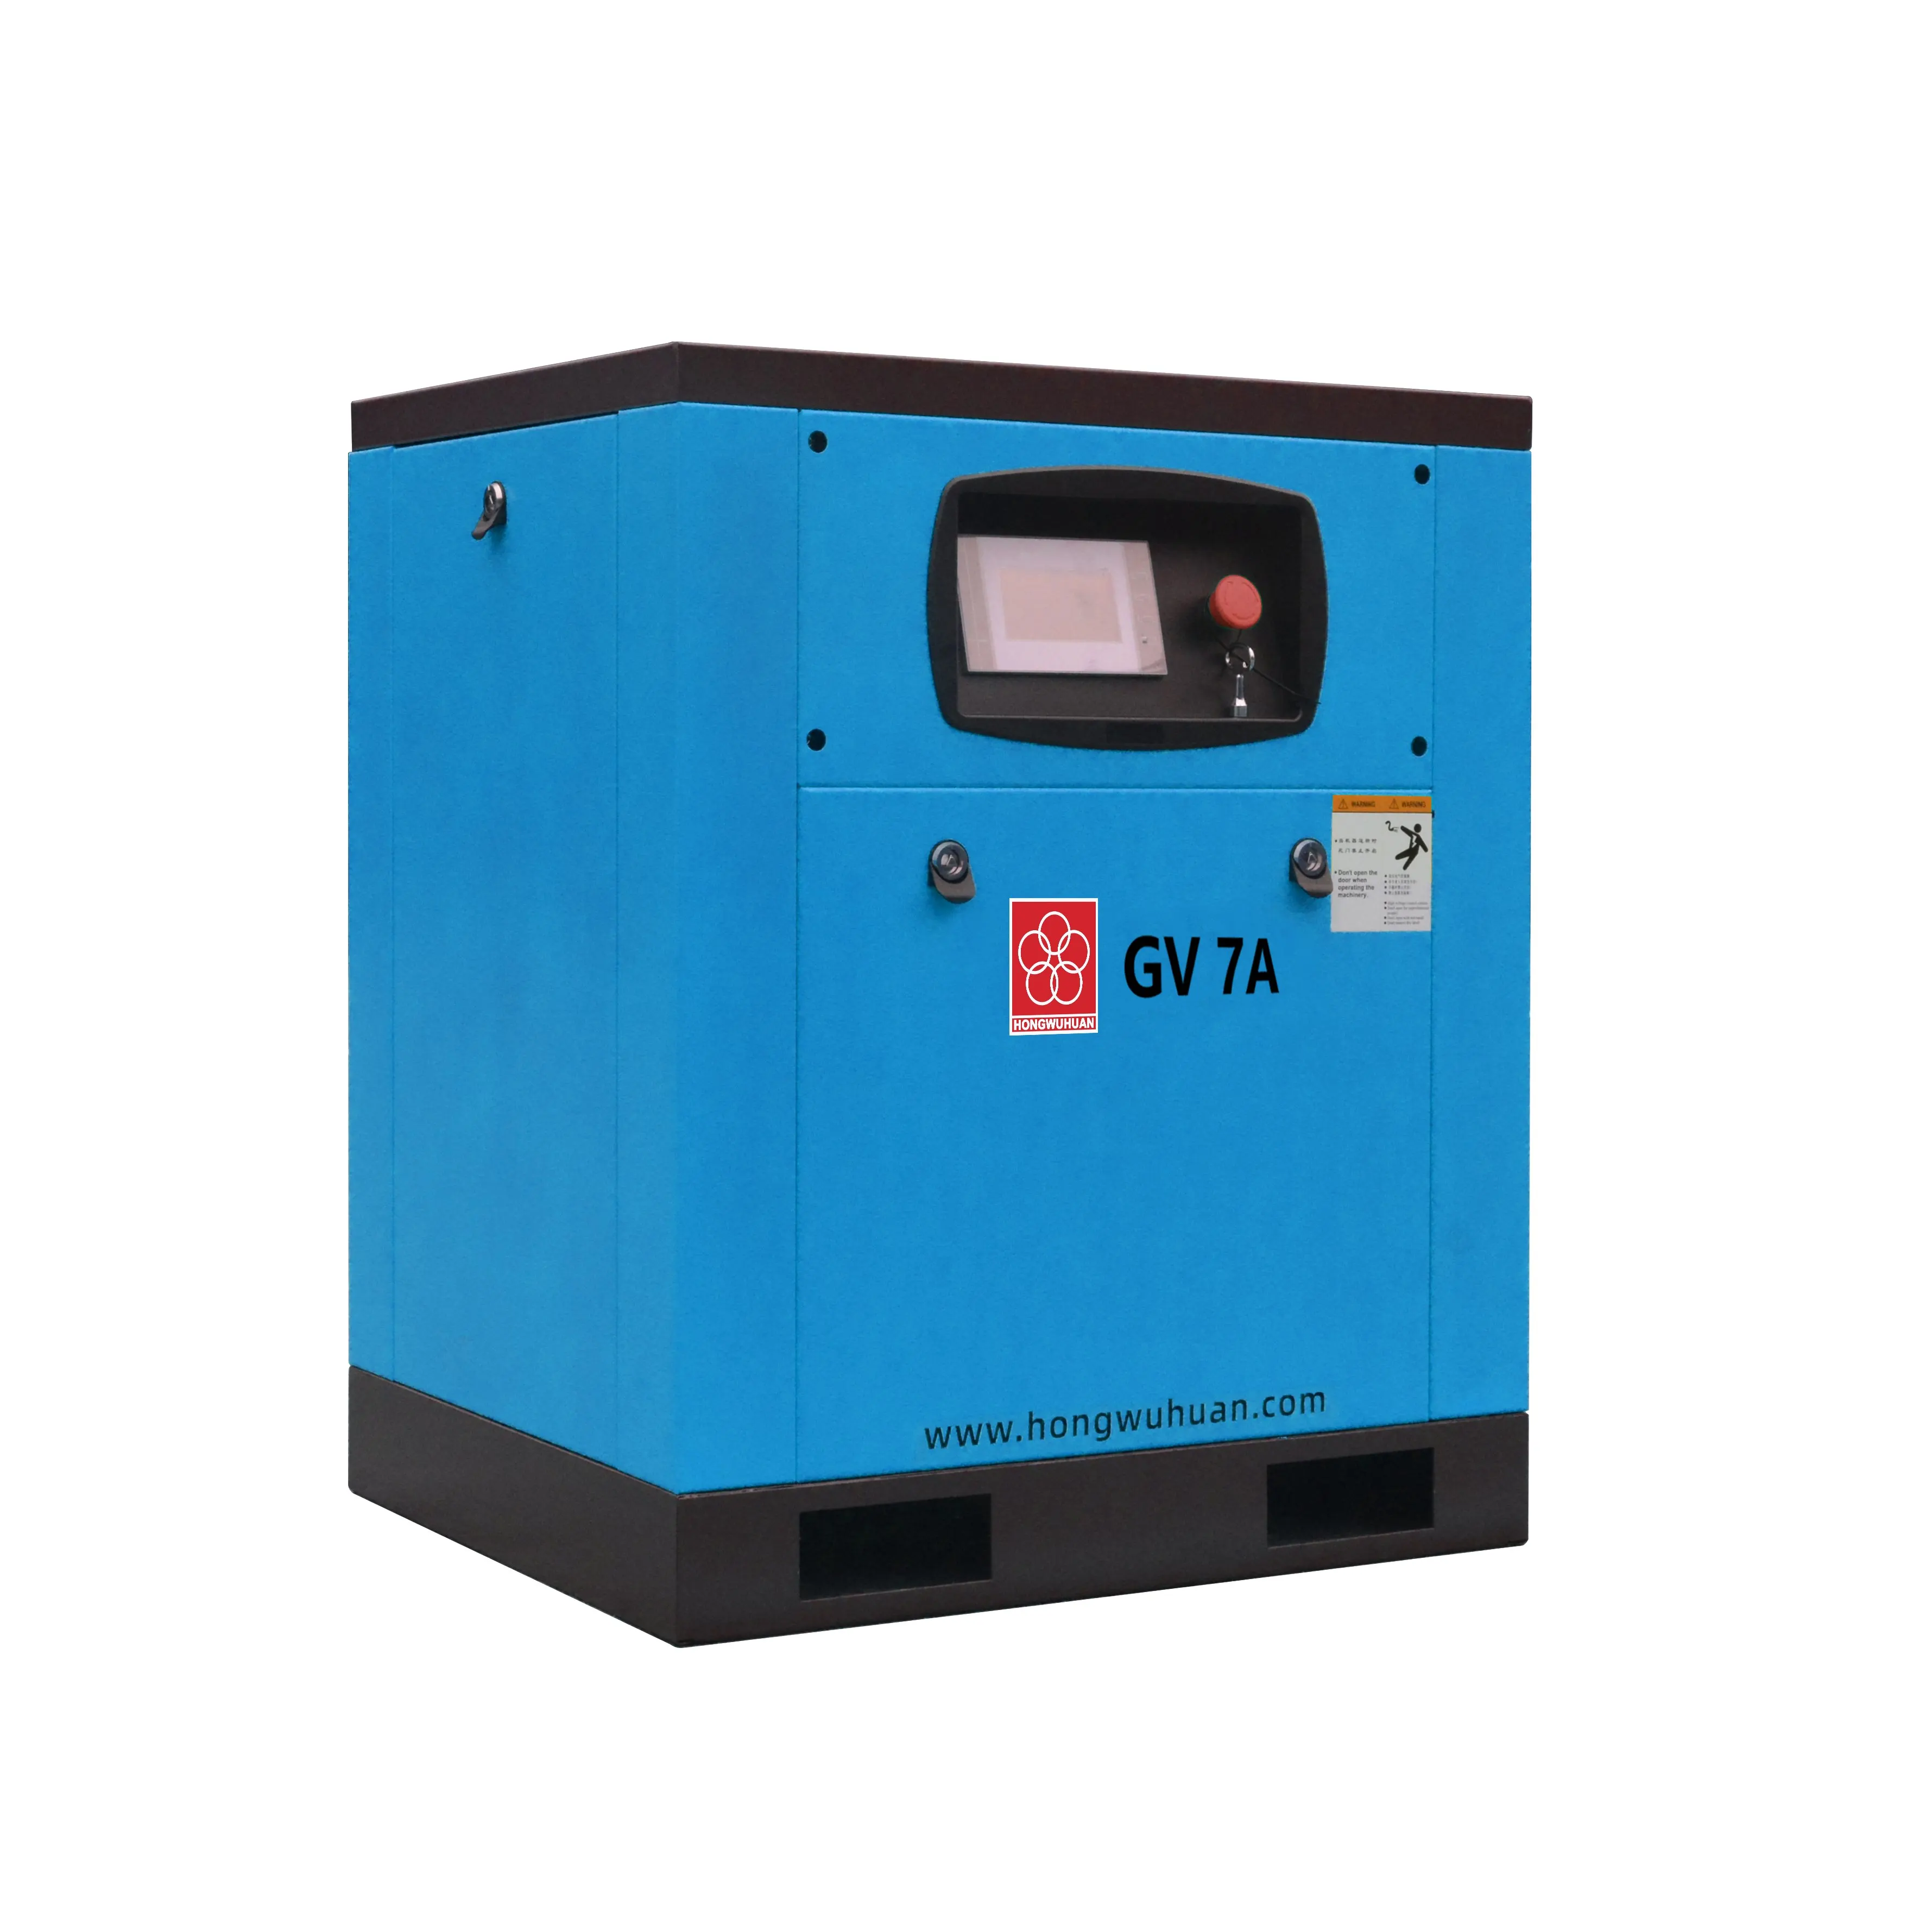 New 7.5kw to 37kw Series Screw Air Compressors 8bar Working Pressure Lubricated AC Power Source